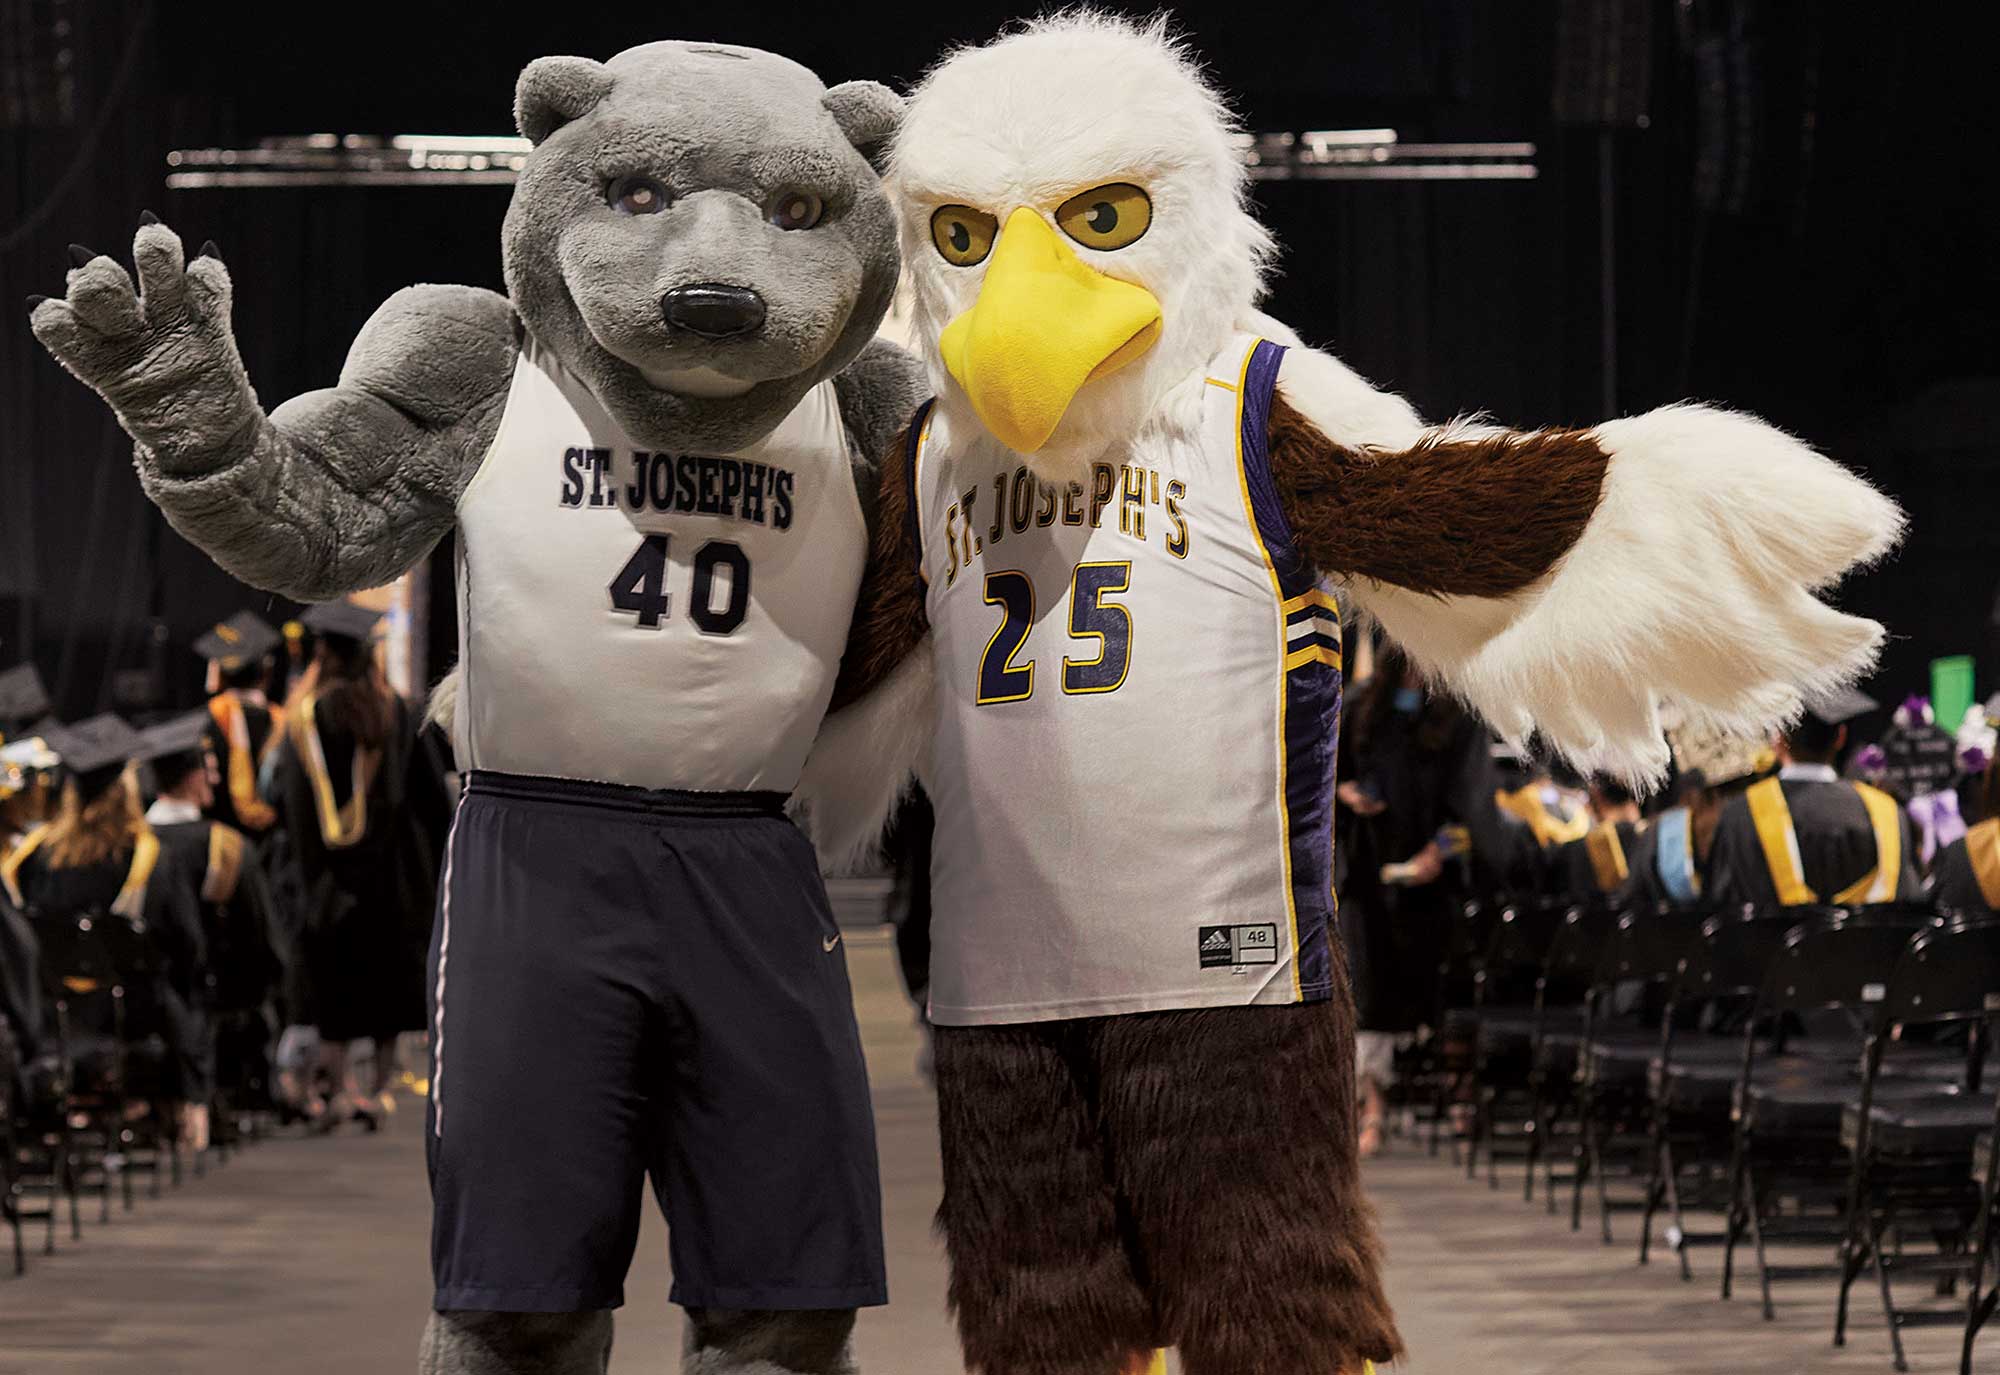 Landscape close-up photograph perspective of St. Joseph's University New York mascots Vandy (dressed on the left in a grey colored bear shaped costume suit with a white/grey/navy blue St. Joseph's basketball jersey and navy blue basketball shorts) and Hot Wyngz (dressed on the right in a brown/white colored eagle shaped costume suit with a white/yellow/navy blue St. Joseph's basketball jersey) posing for a picture next to each other at a graduation ceremony indoors